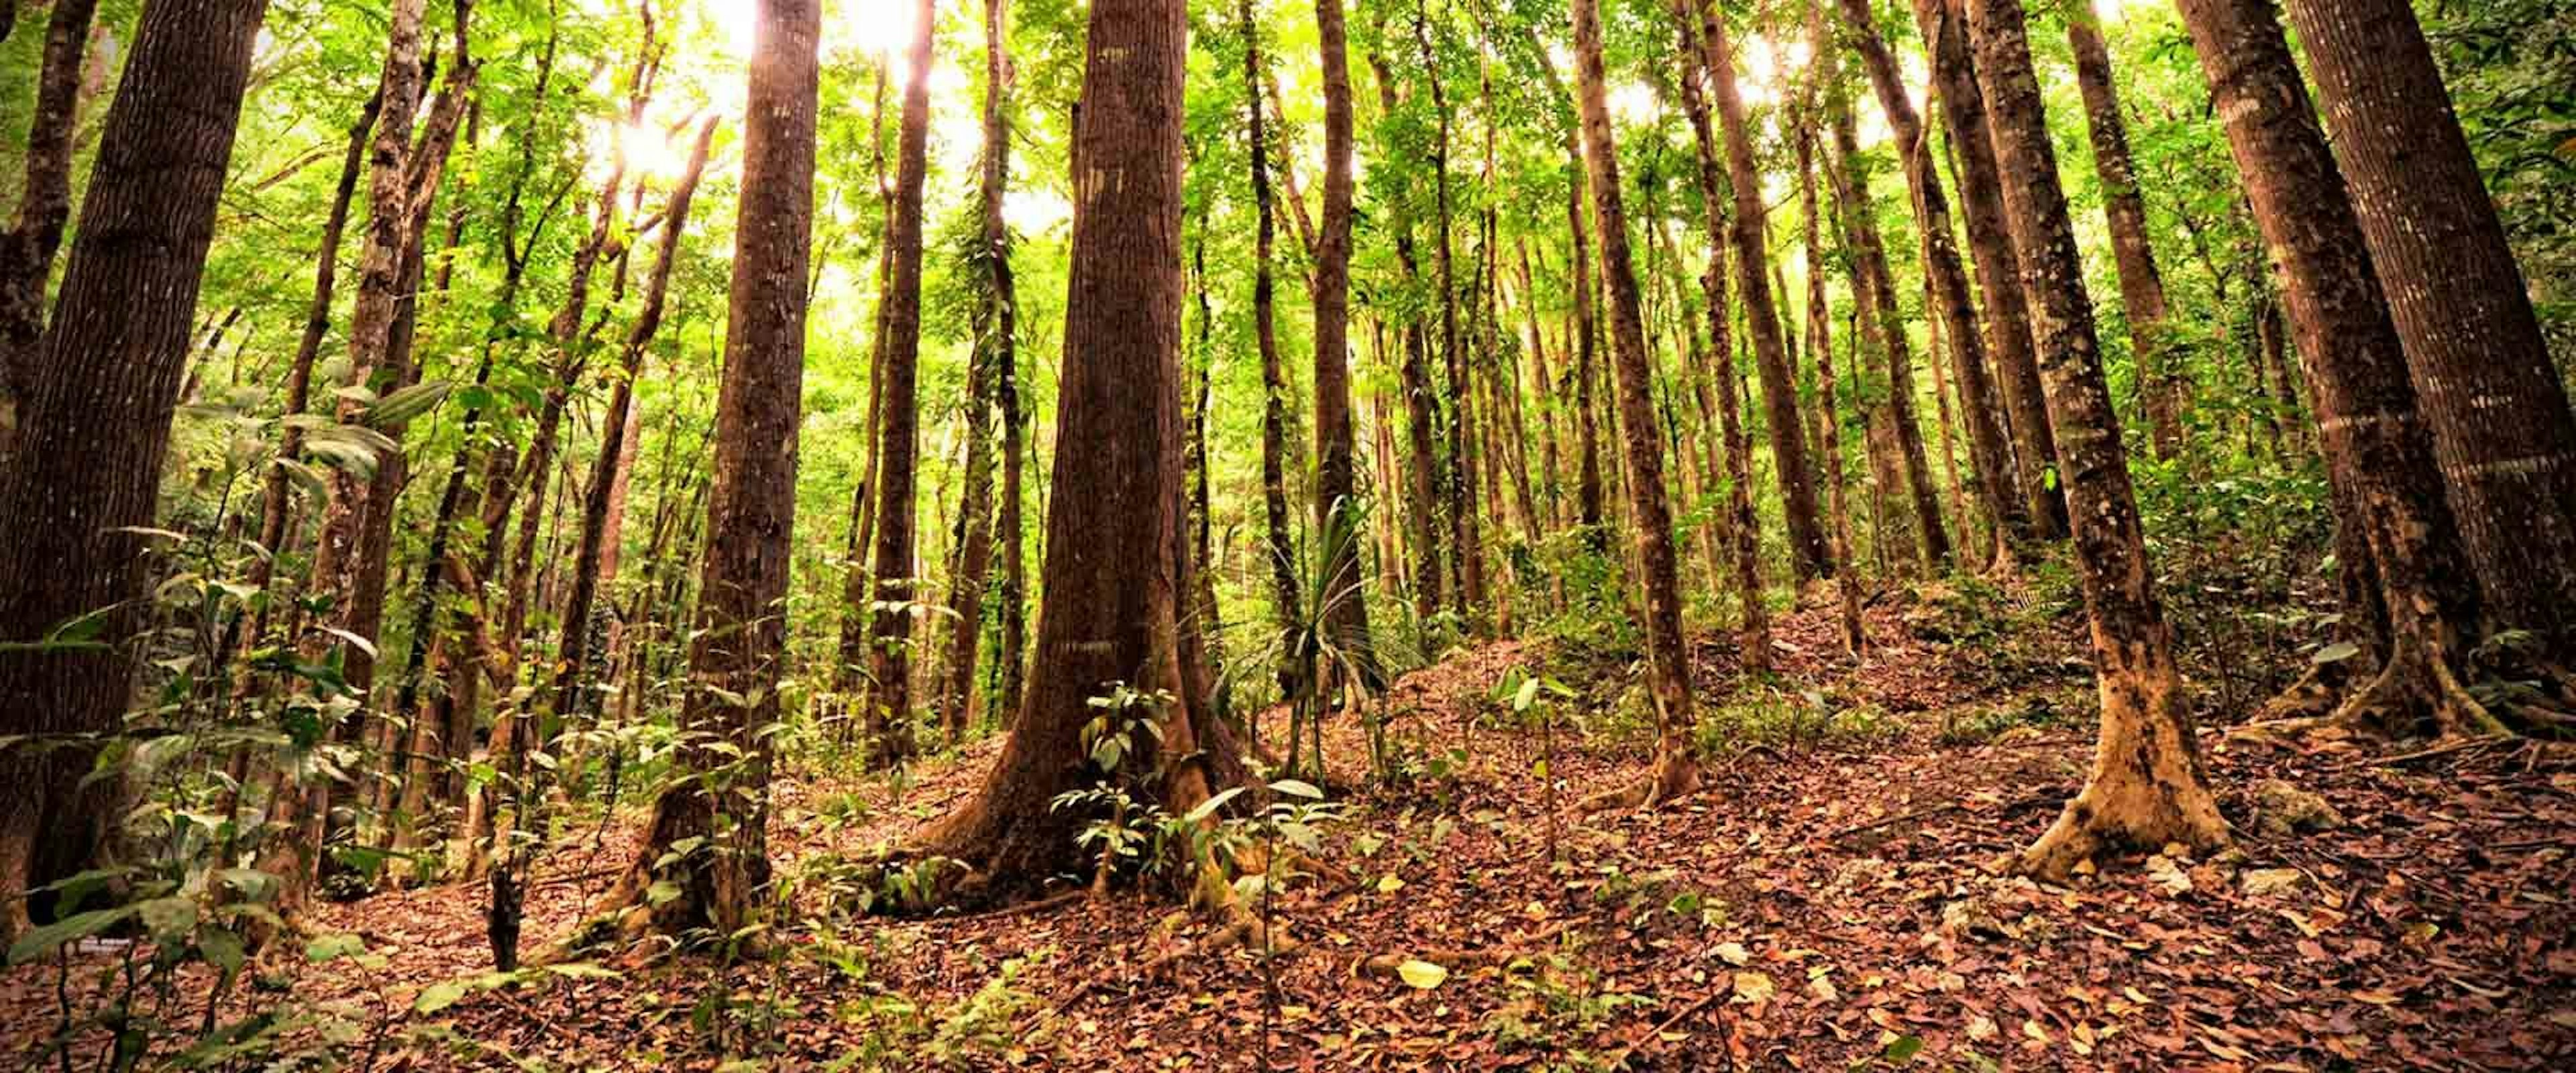 Trees in Philippines forest carbon sequestration forest